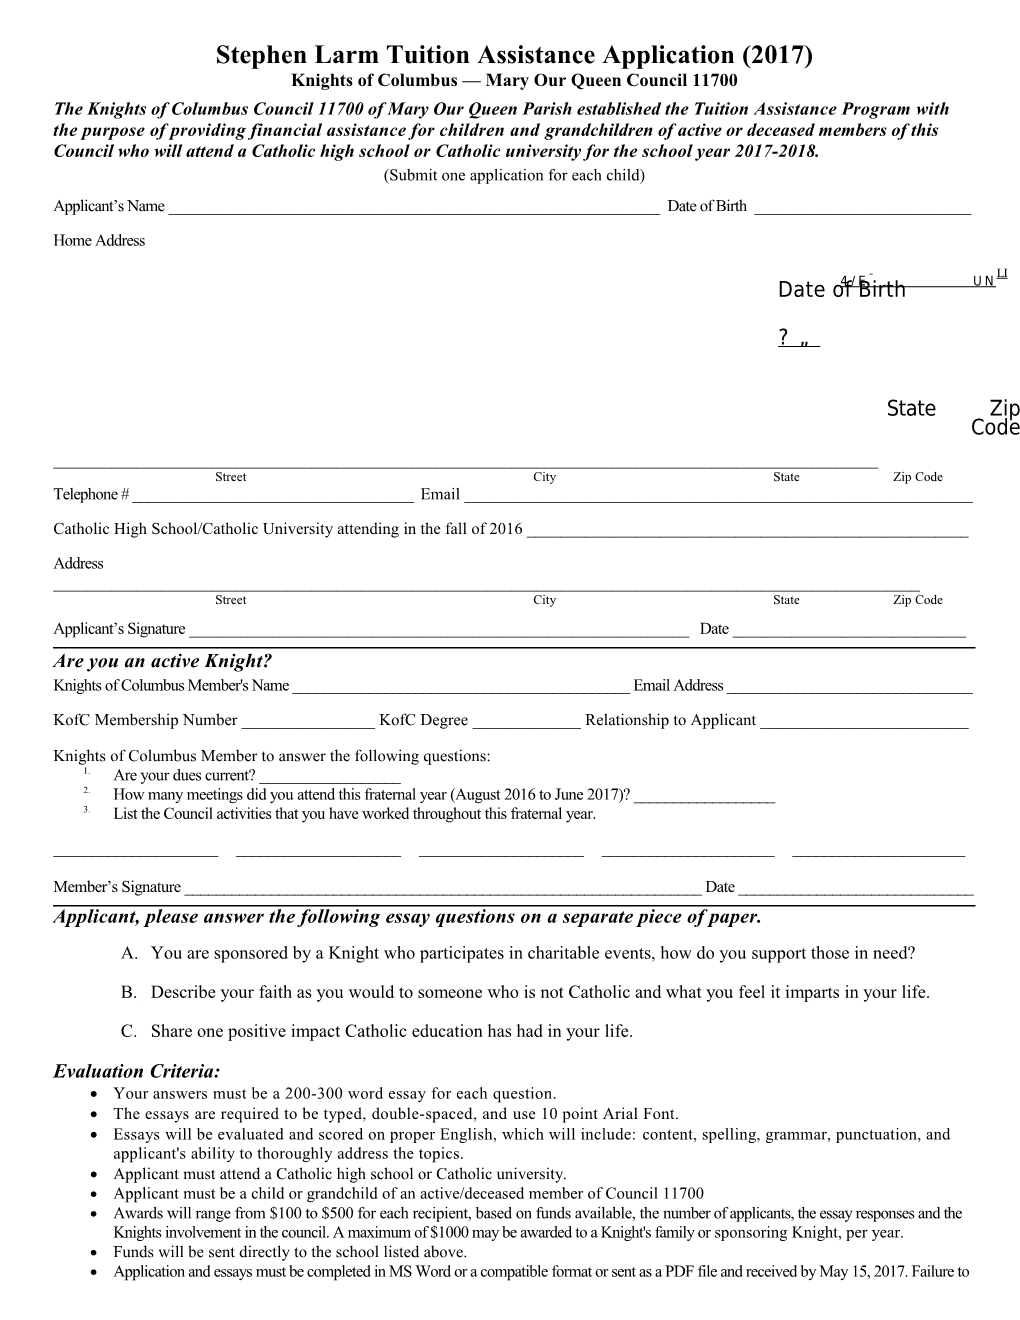 Stephen Larm Tuition Assistance Application (2017) Knights of Columbus Mary Our Queen